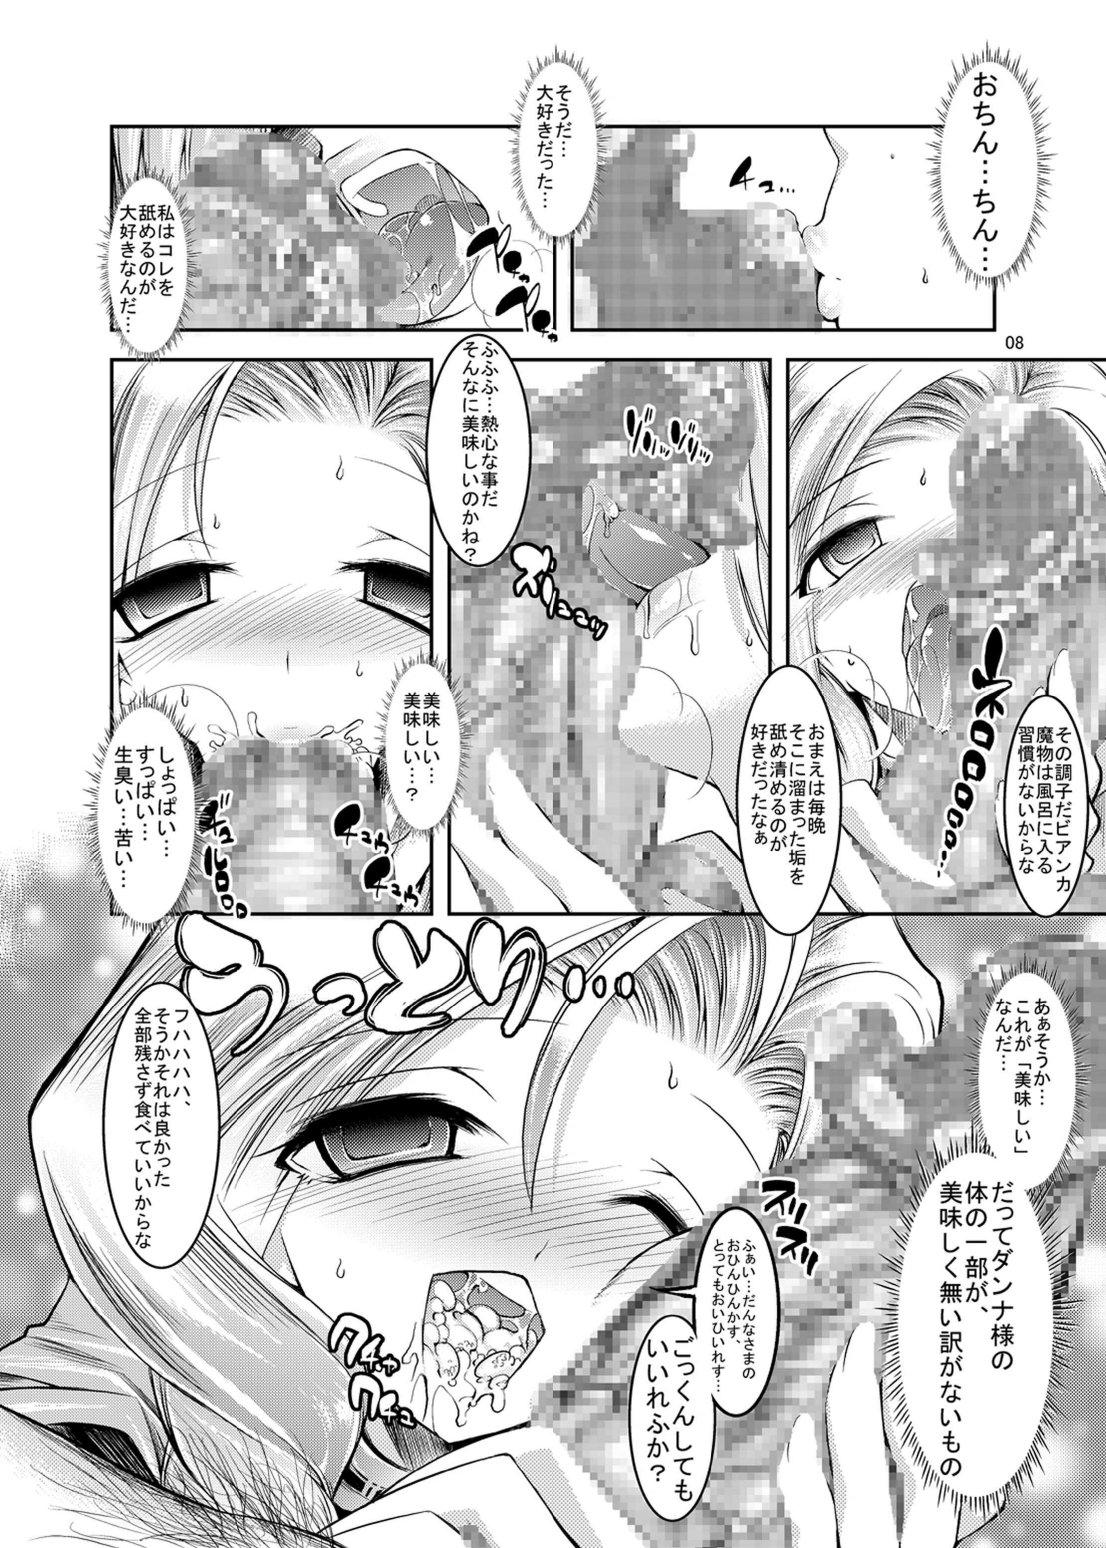 18 Year Old Porn Medapani Quest Bianca-hen - Dragon quest v Shaking - Page 8